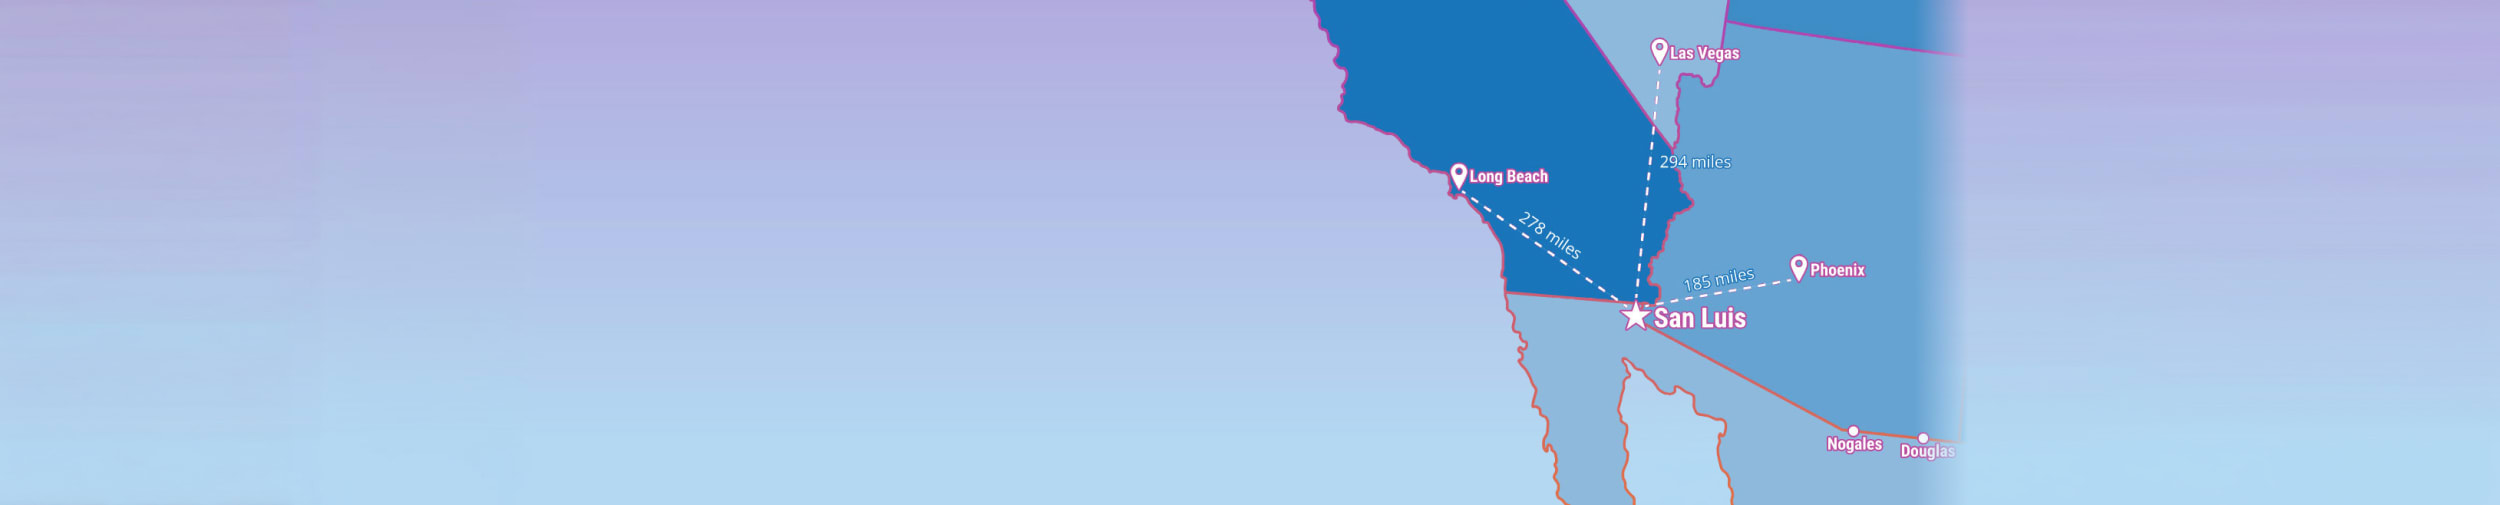 A map showing San Luis's location compared to Long Beach, Phoenix and Las Vegas